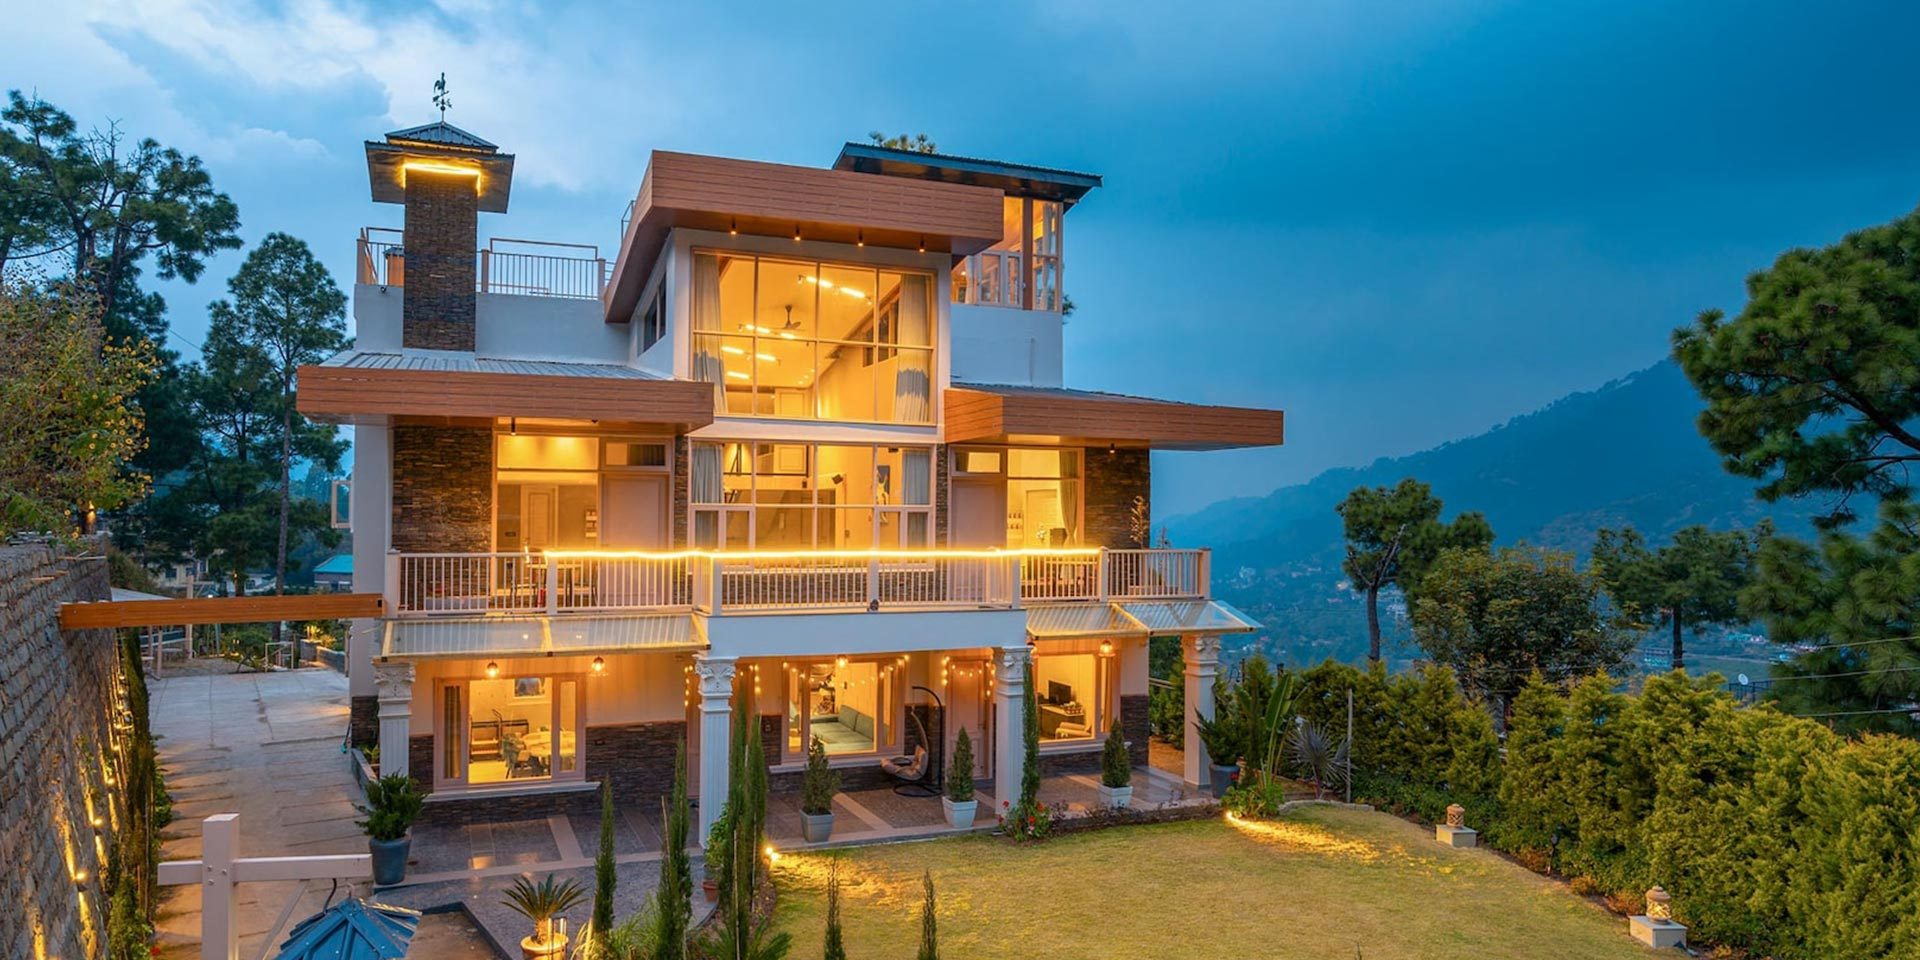 Why You Should Book a Villa in Kasauli for Your Next Family Vacation